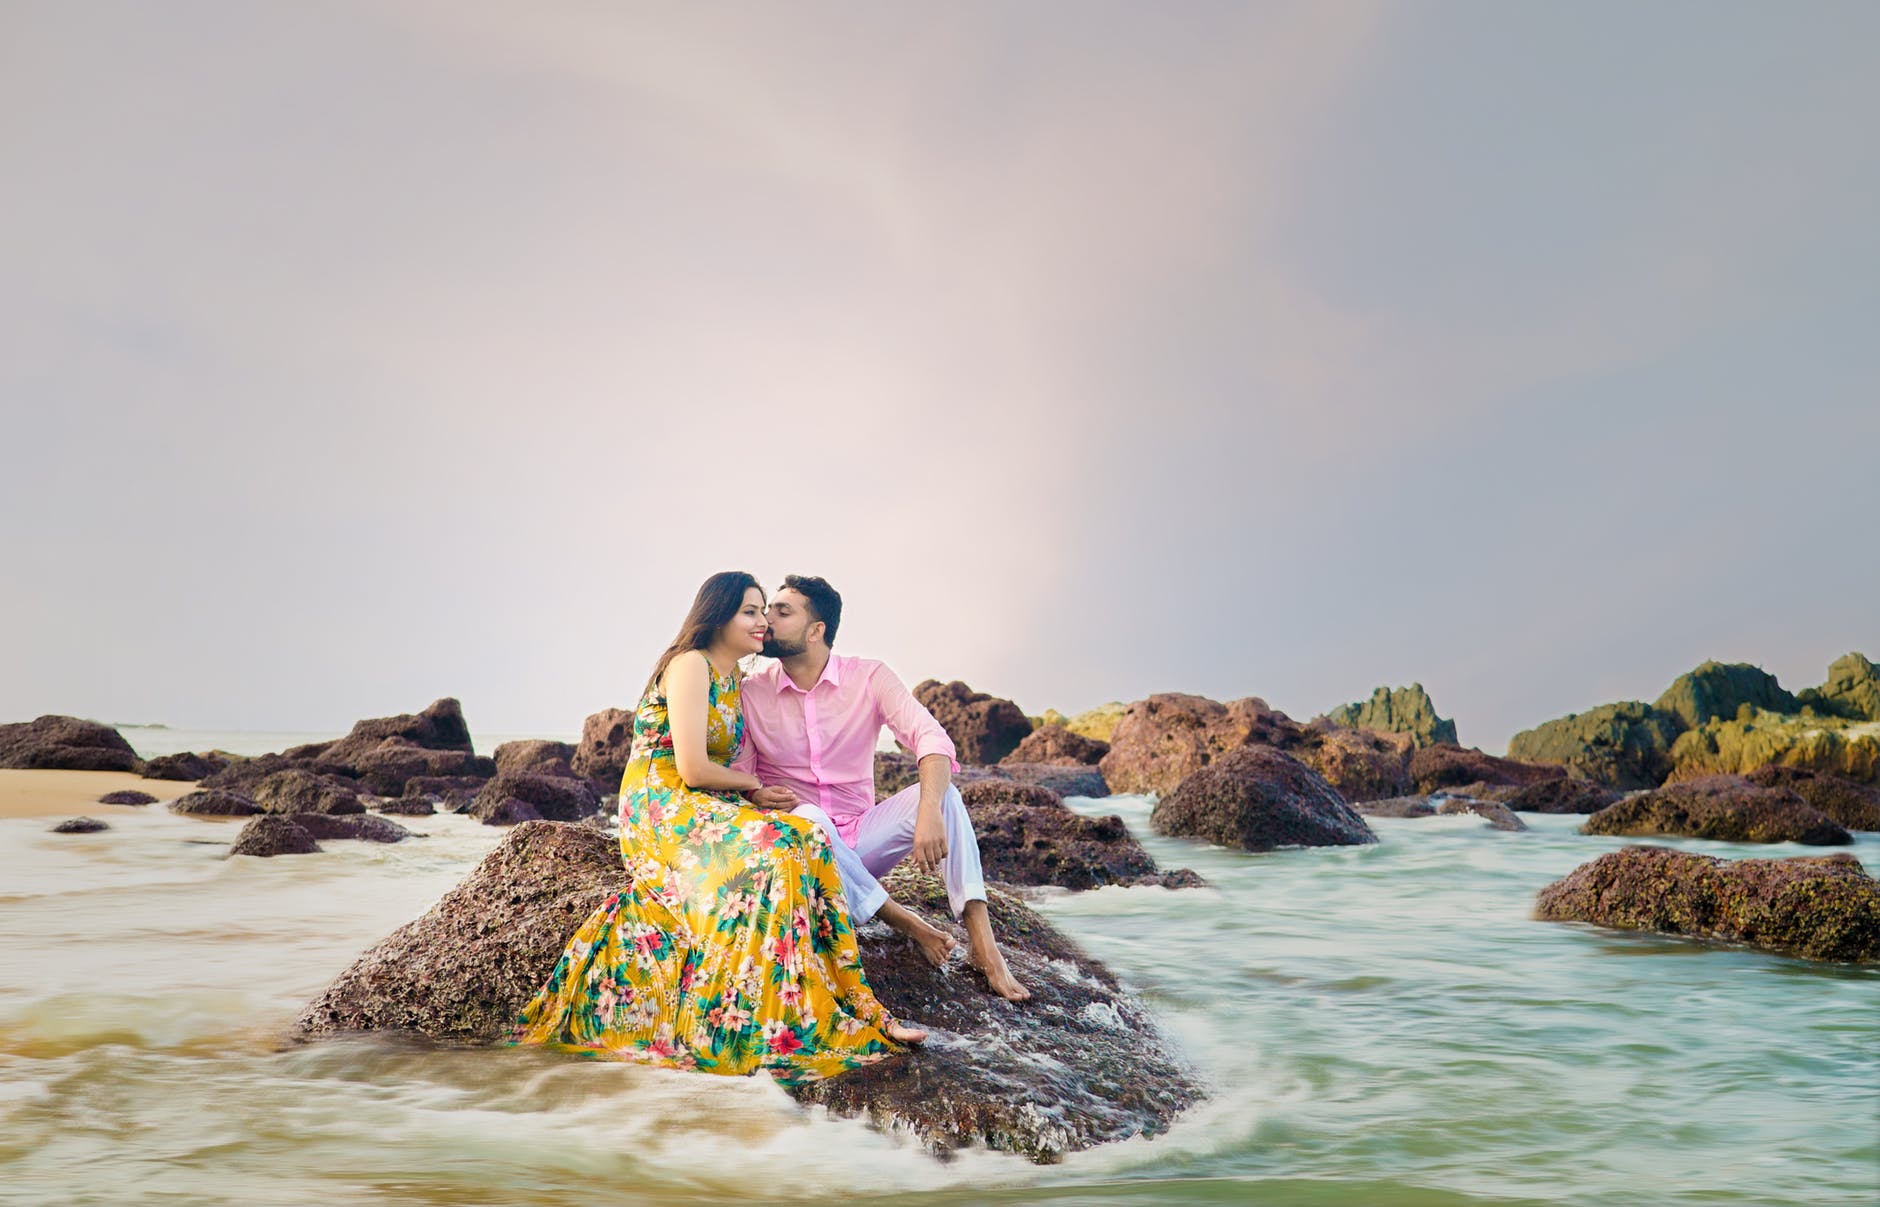 Pre Wedding Photoshoot Location In Mumbai A Perfect Location For